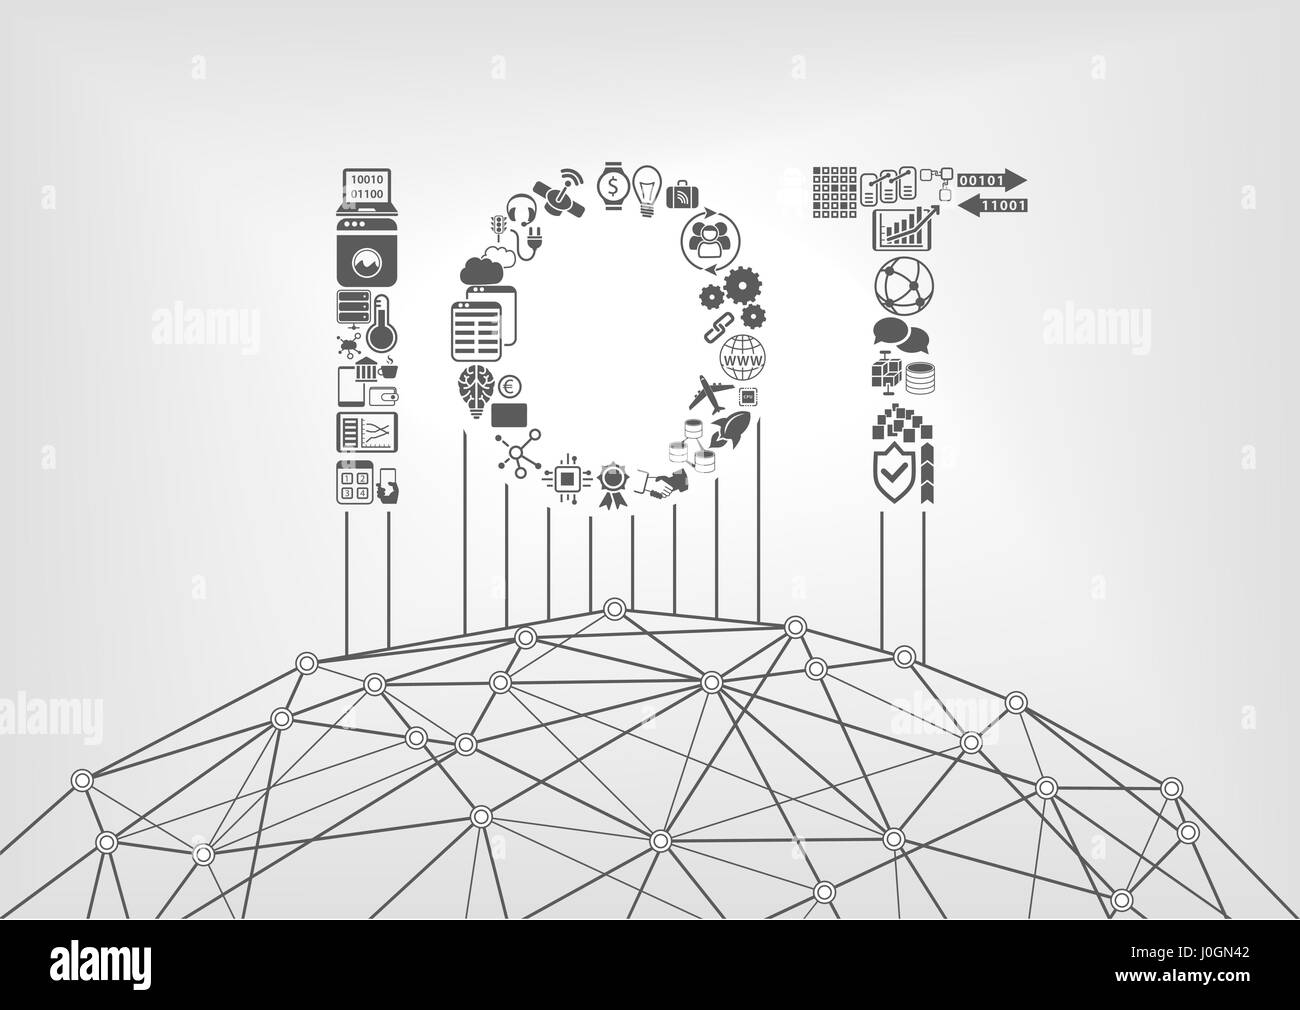 Internet of Things concept with IOT text Stock Vector